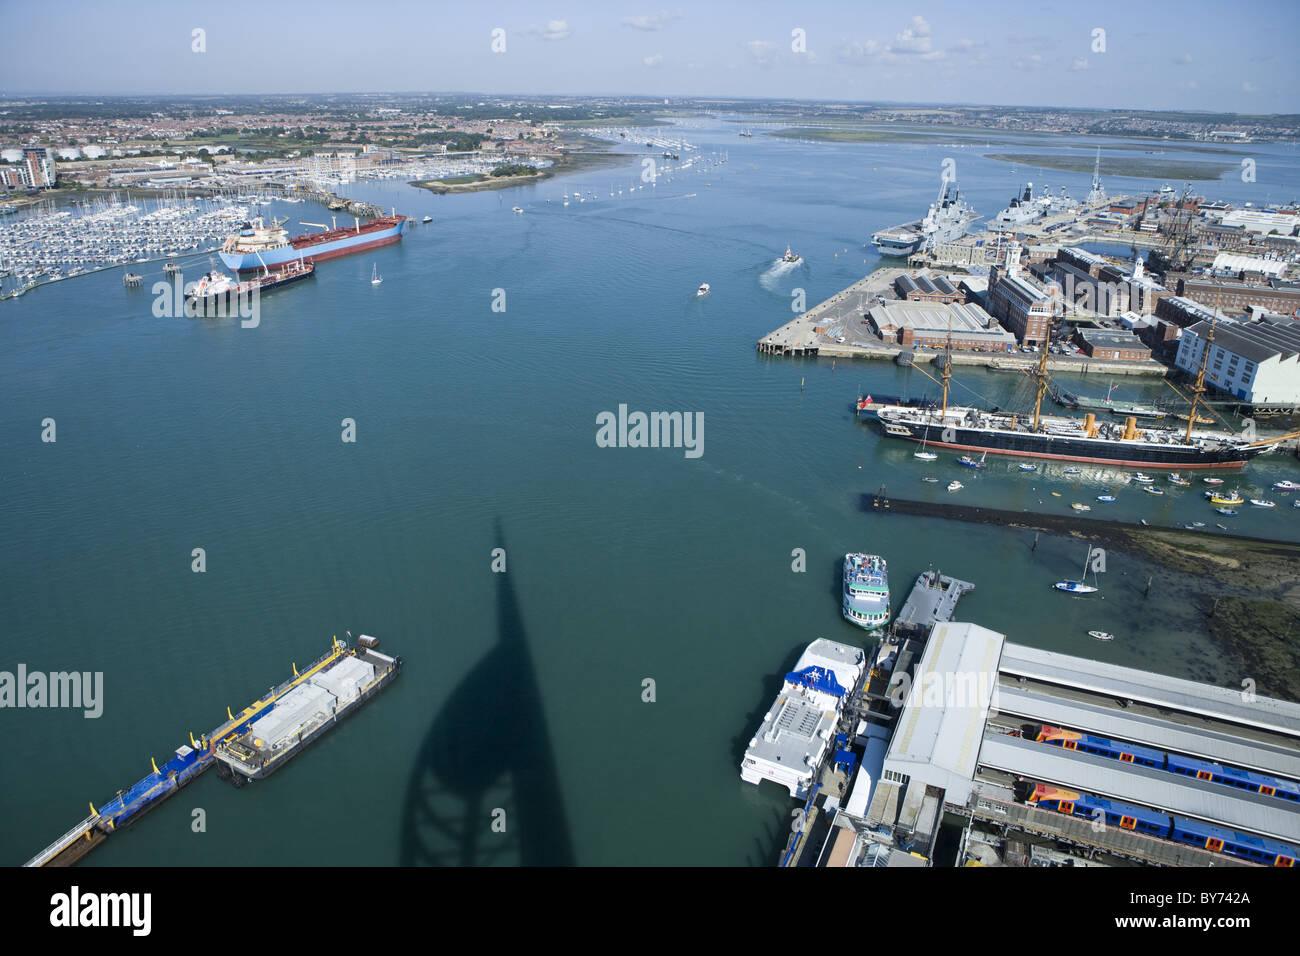 View over Portsmouth Historic Dockyard in the sunlight, Portsmouth, Hampshire, England, Europe Stock Photo